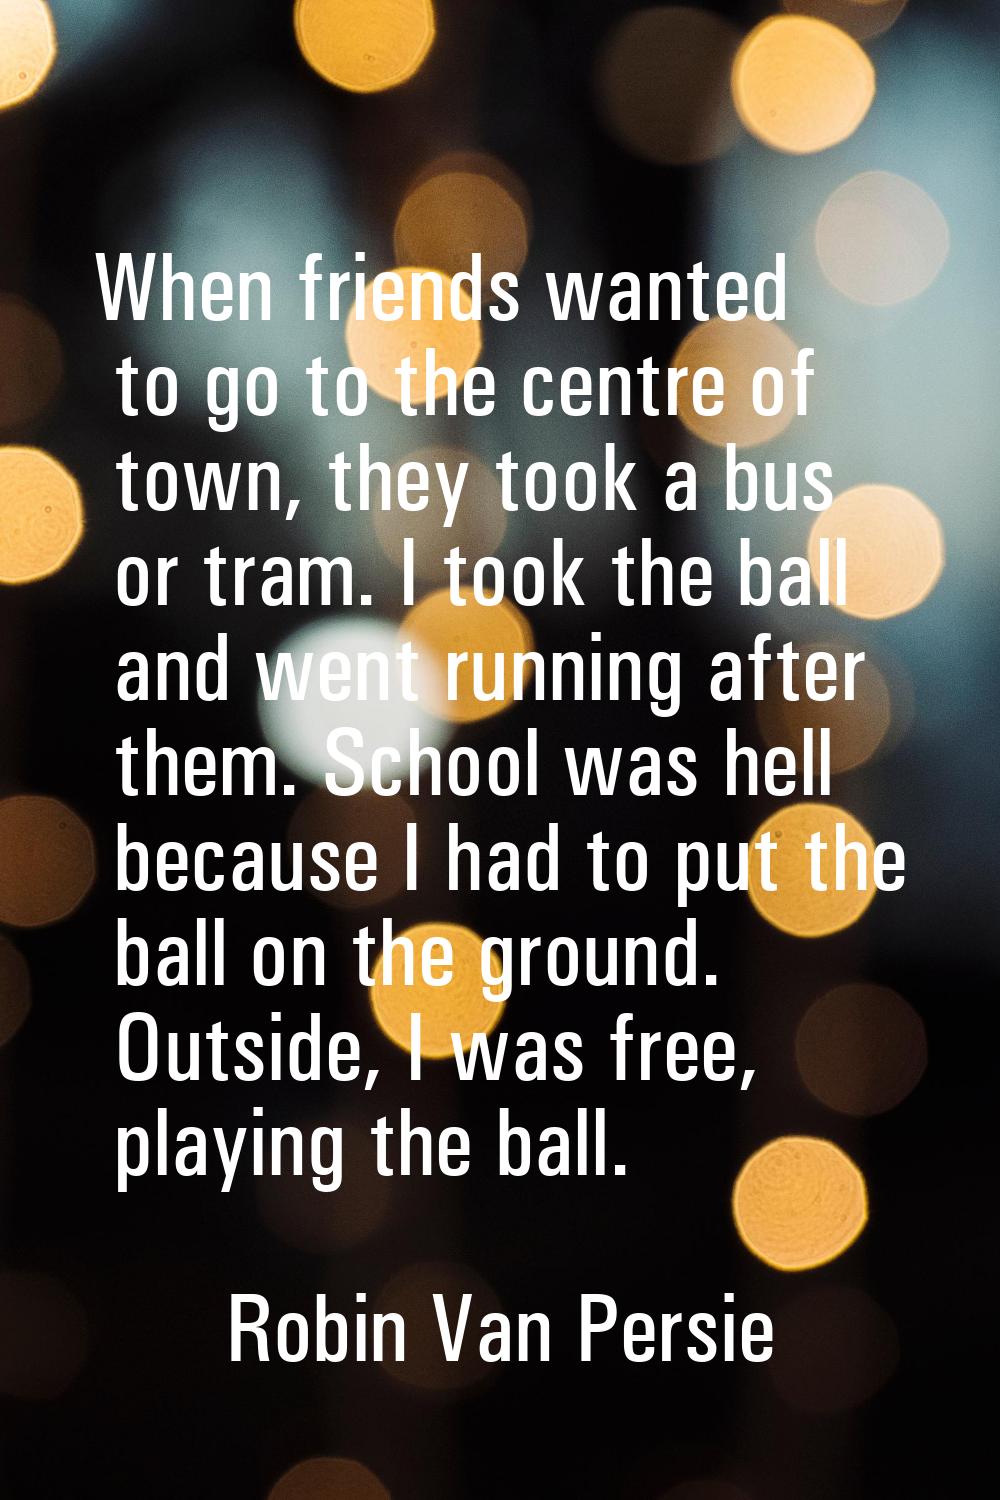 When friends wanted to go to the centre of town, they took a bus or tram. I took the ball and went 